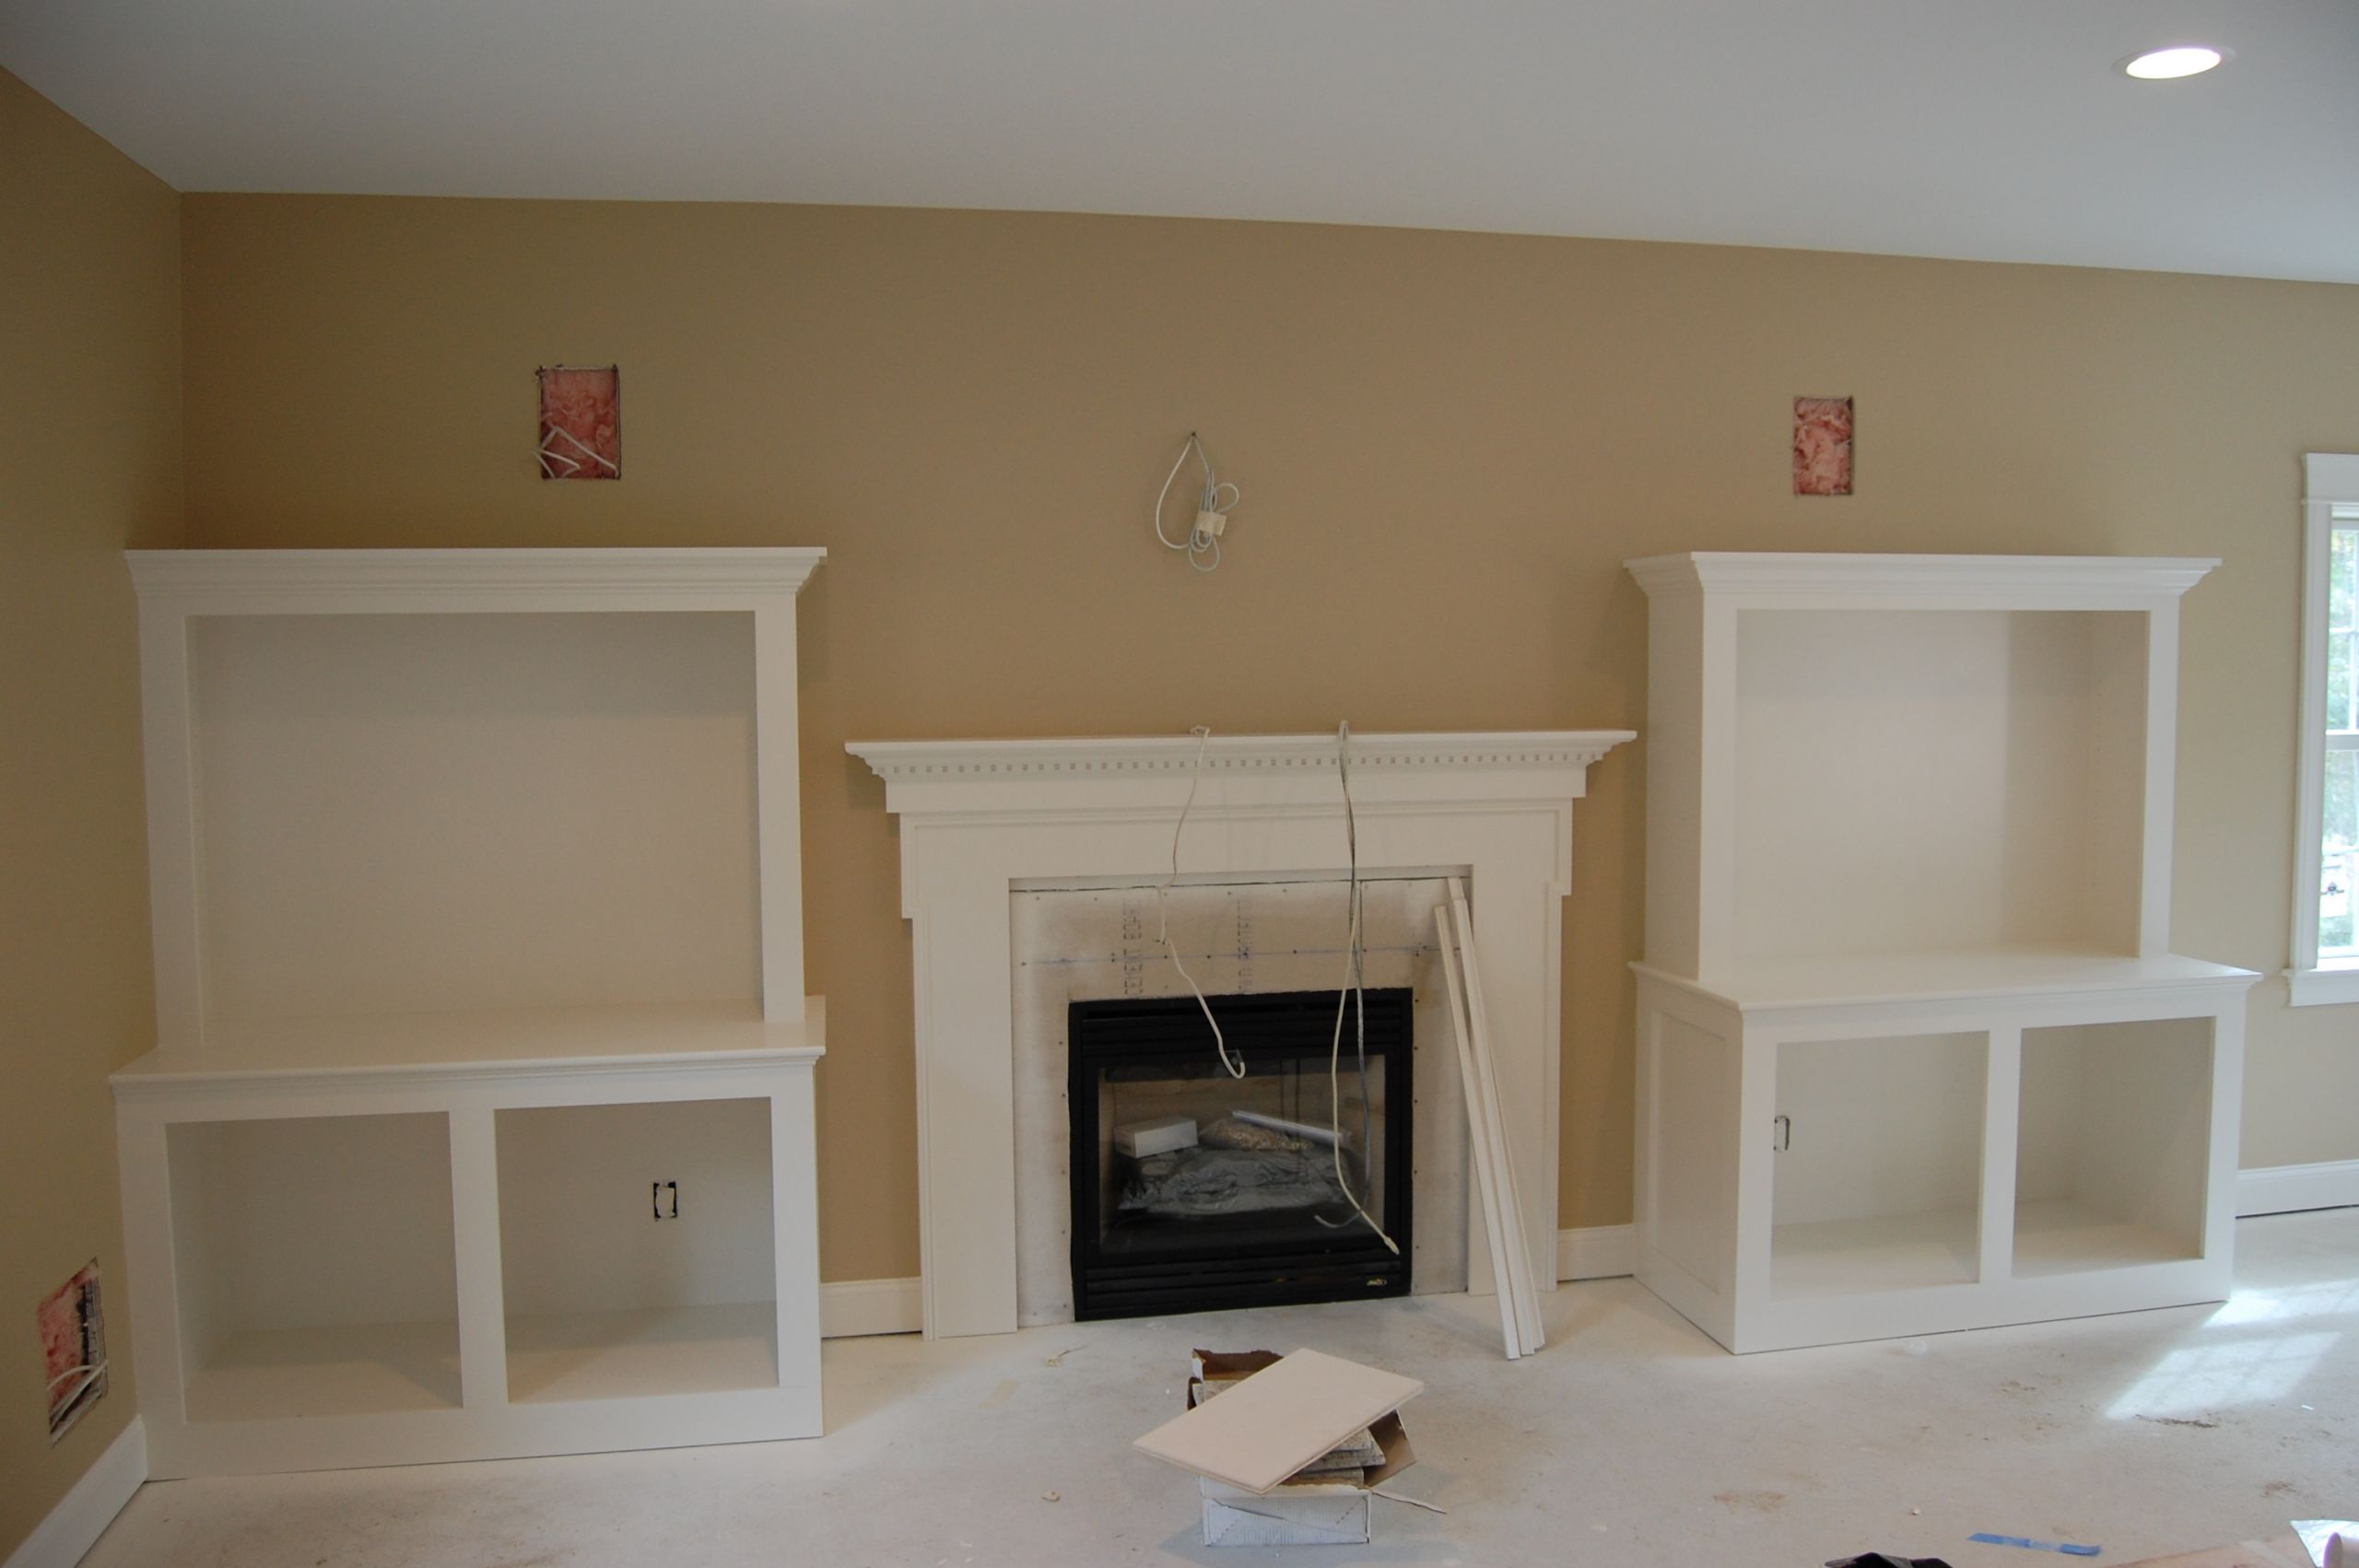 Electric Fireplace Surround Plans
 Plans to build Build Your Own Electric Fireplace Surround